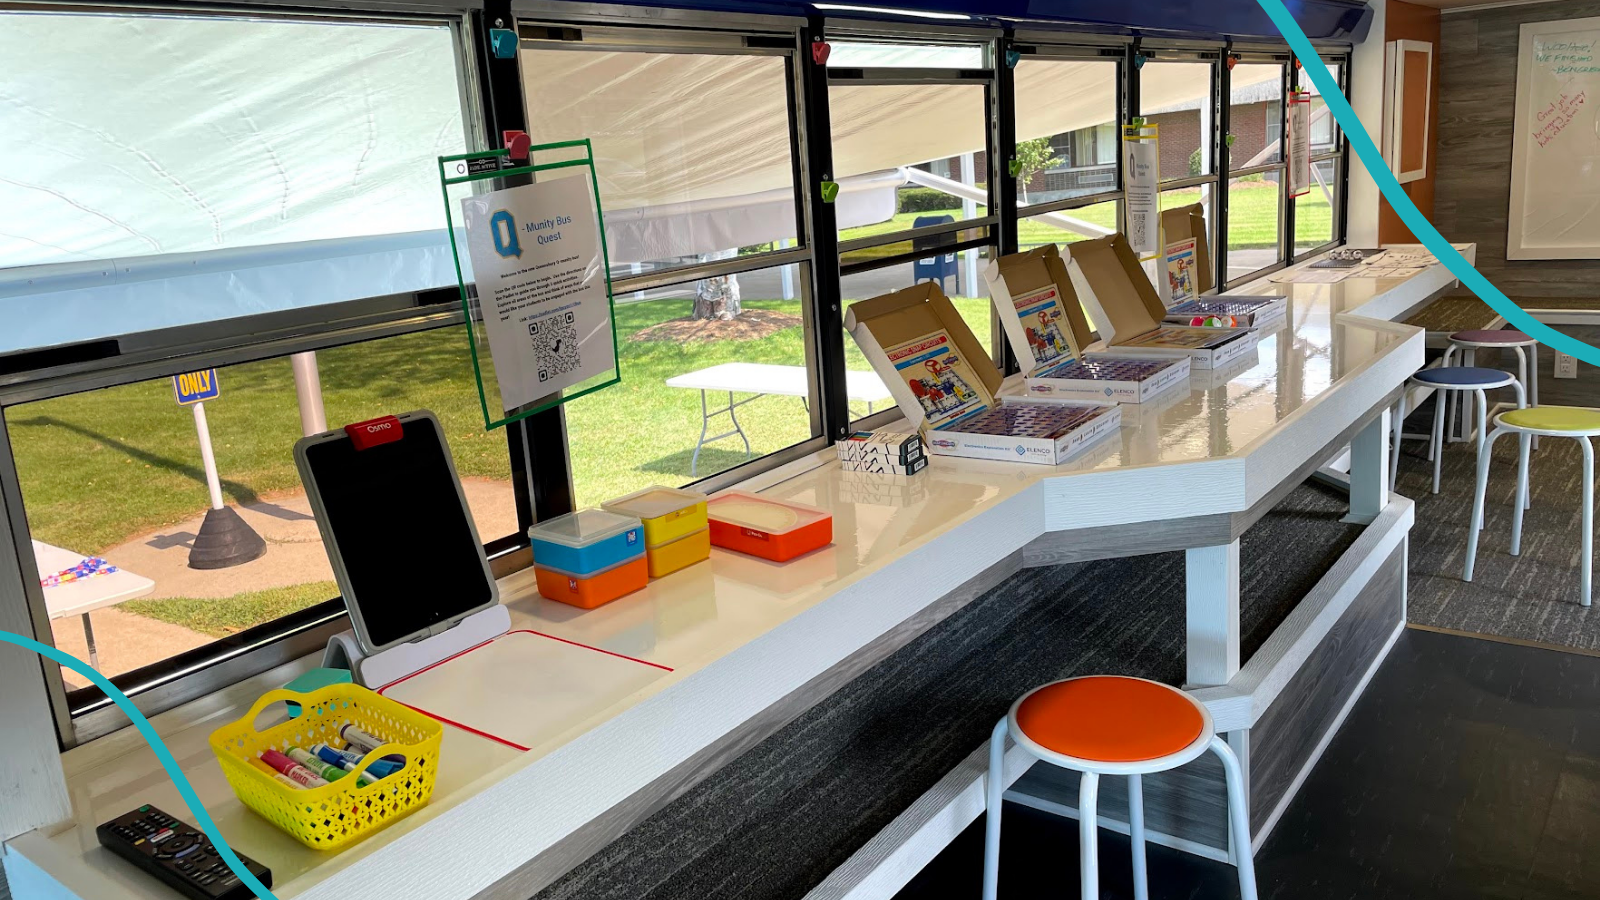 Take a look at this stem studio in a bus